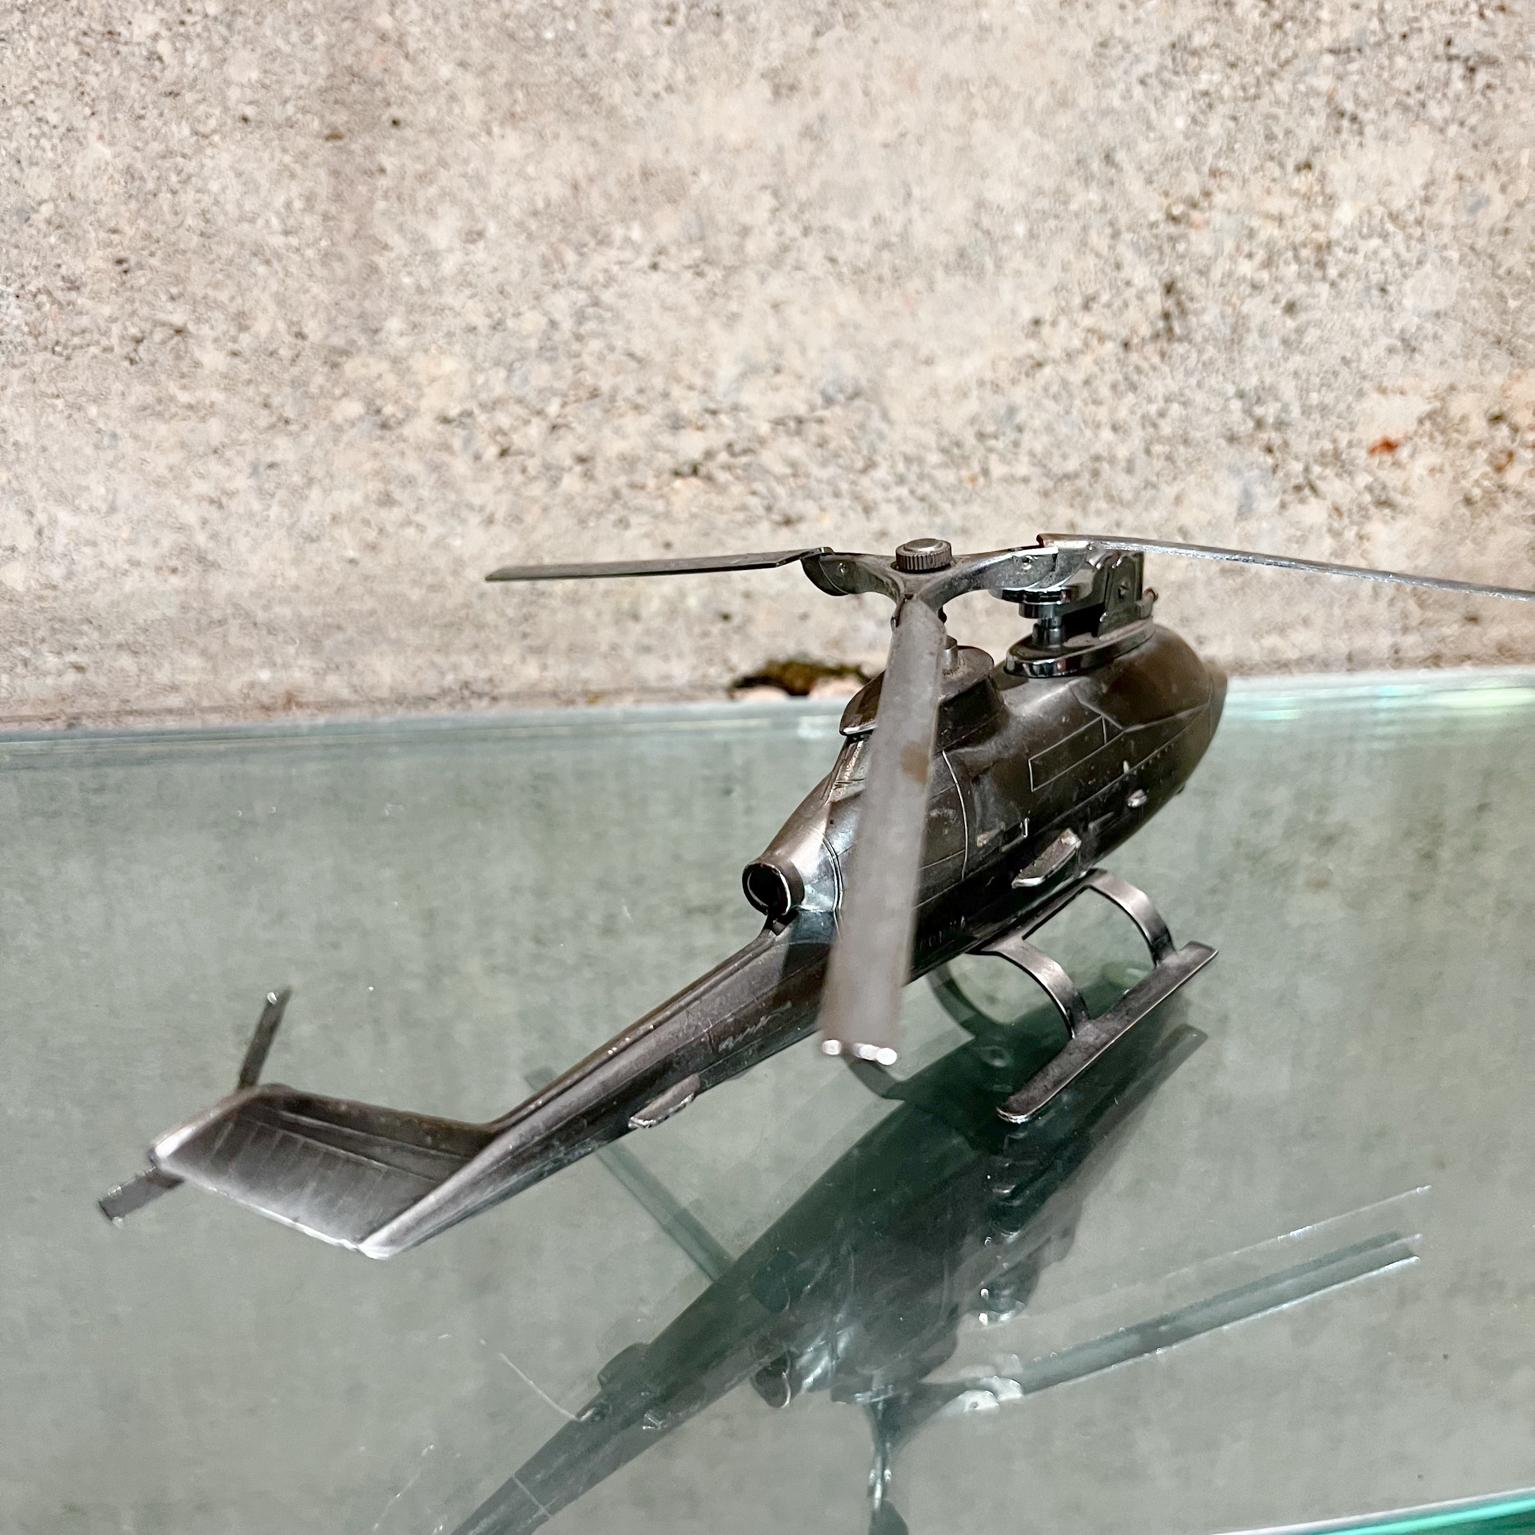 1980s helicopter